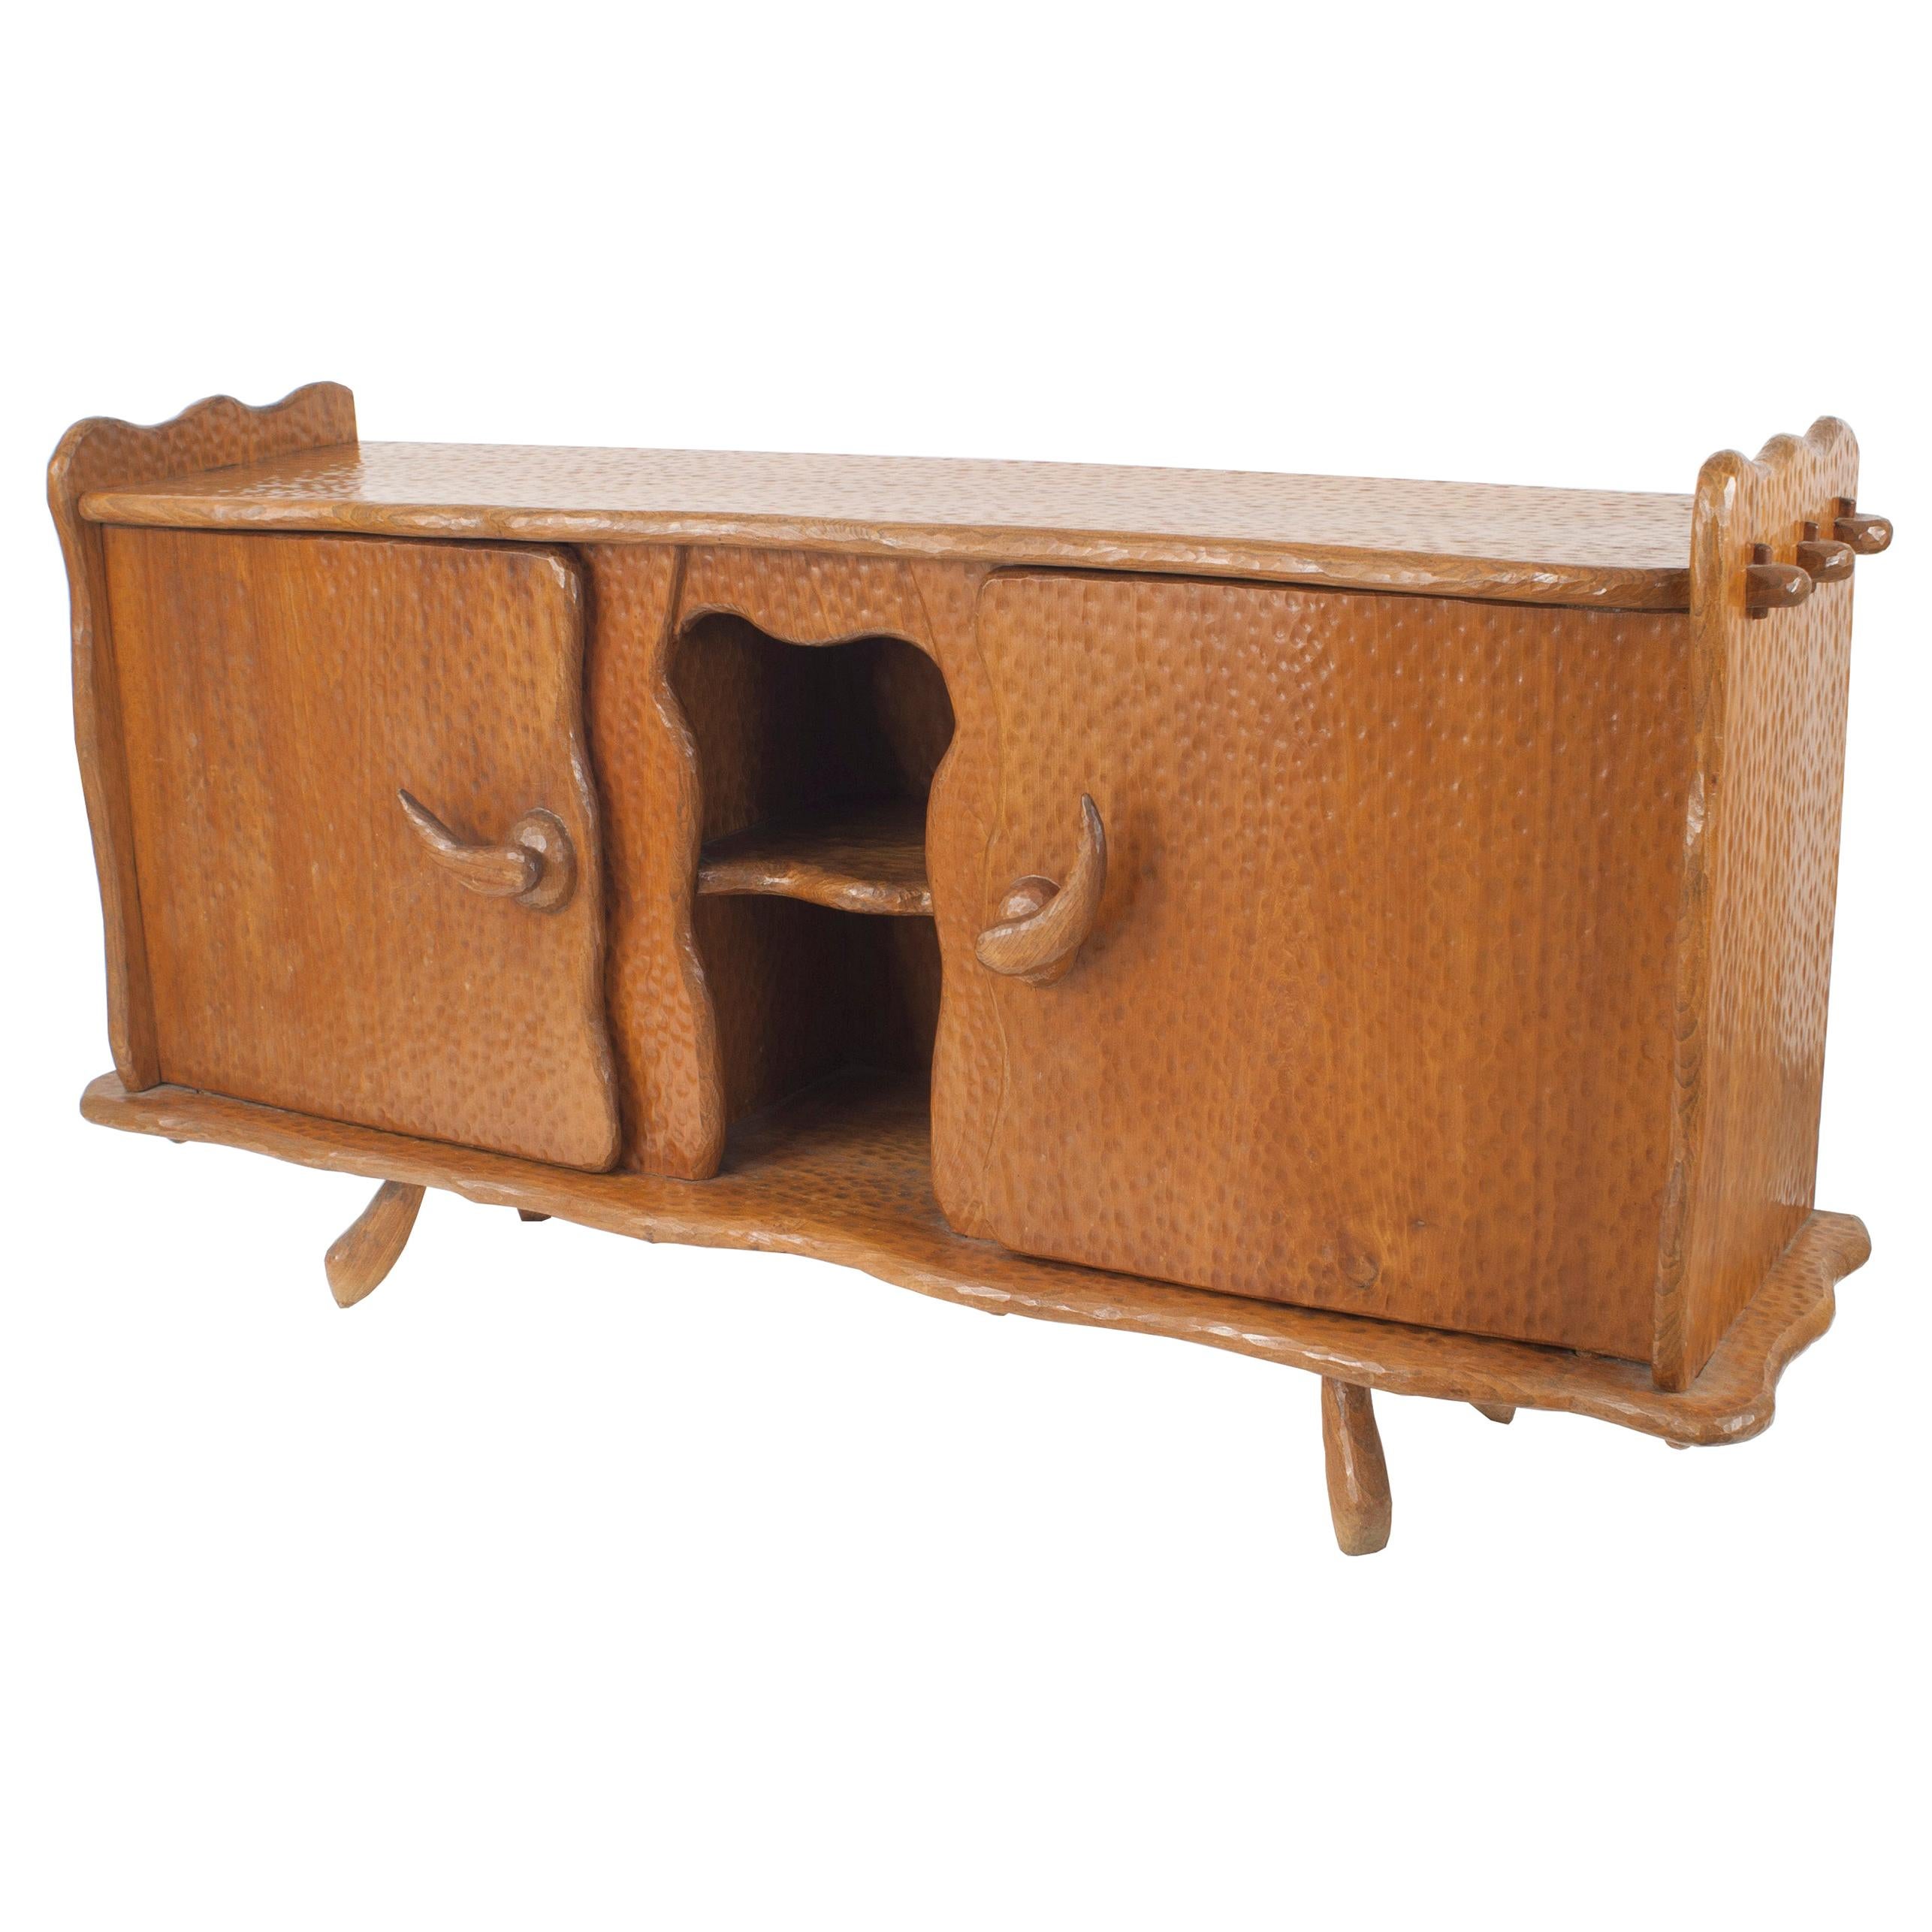 Rustic Adirondack Style Pine Sideboard For Sale